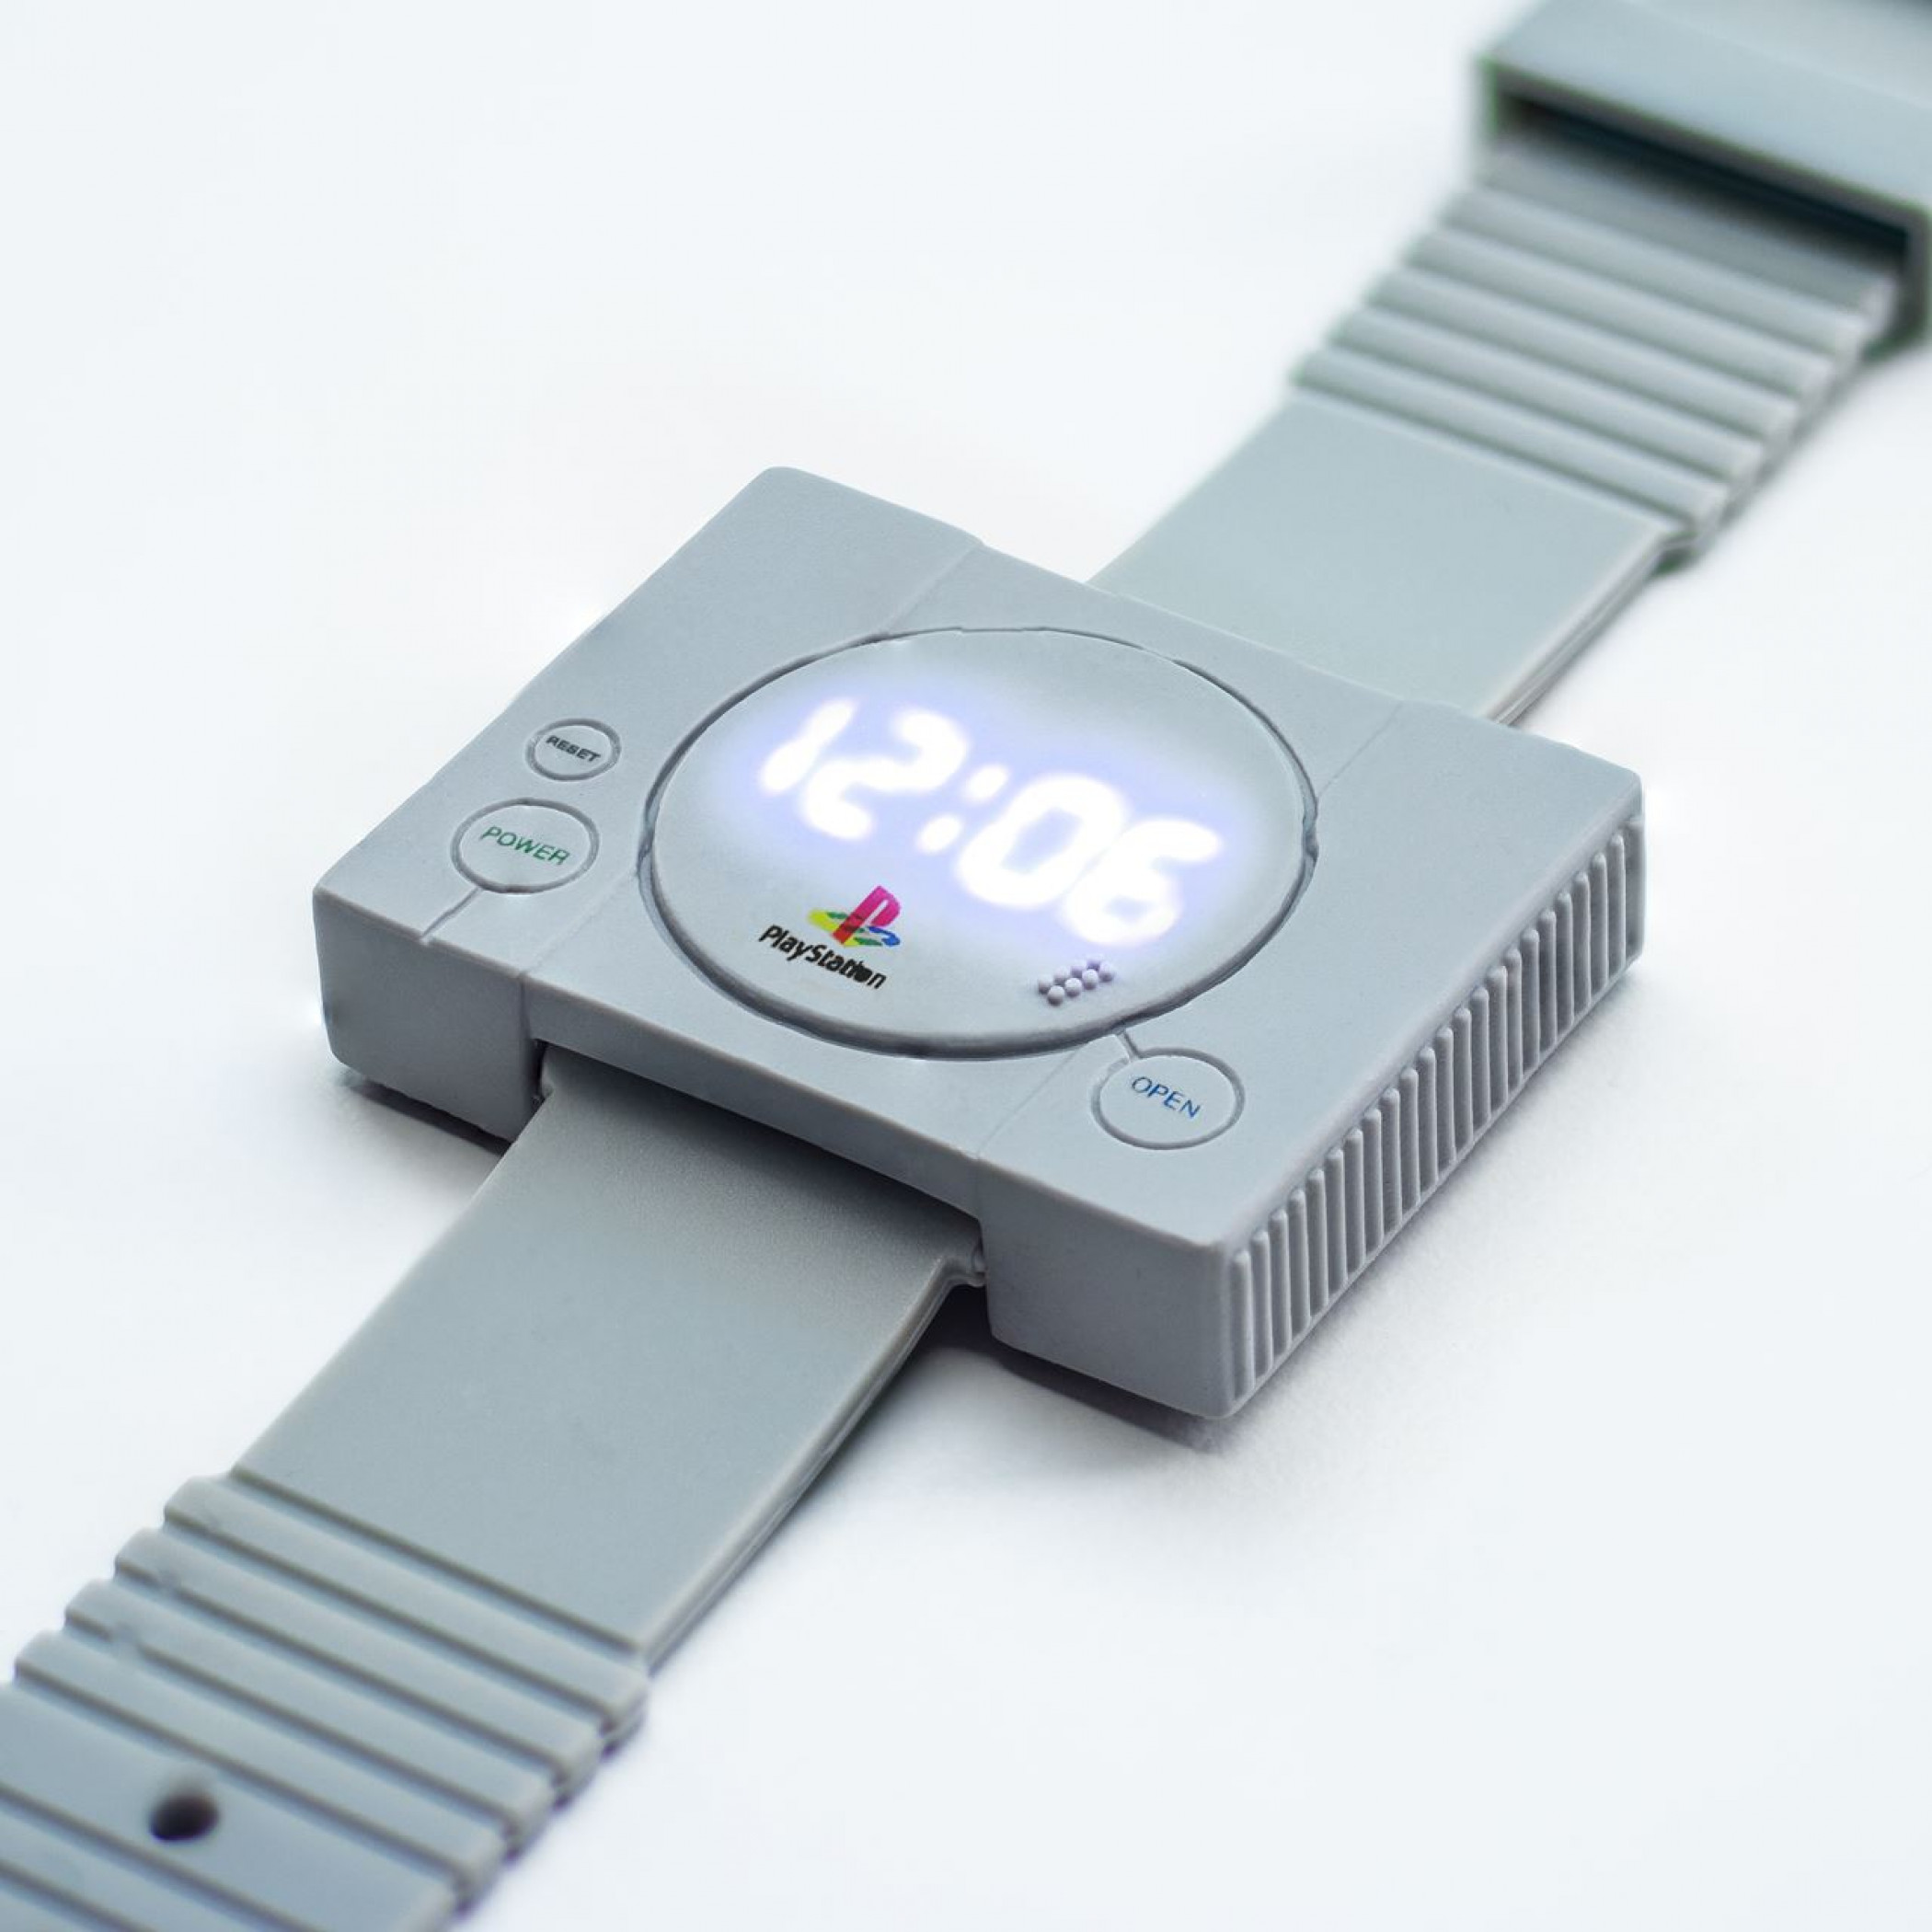 PlayStation Console Watch